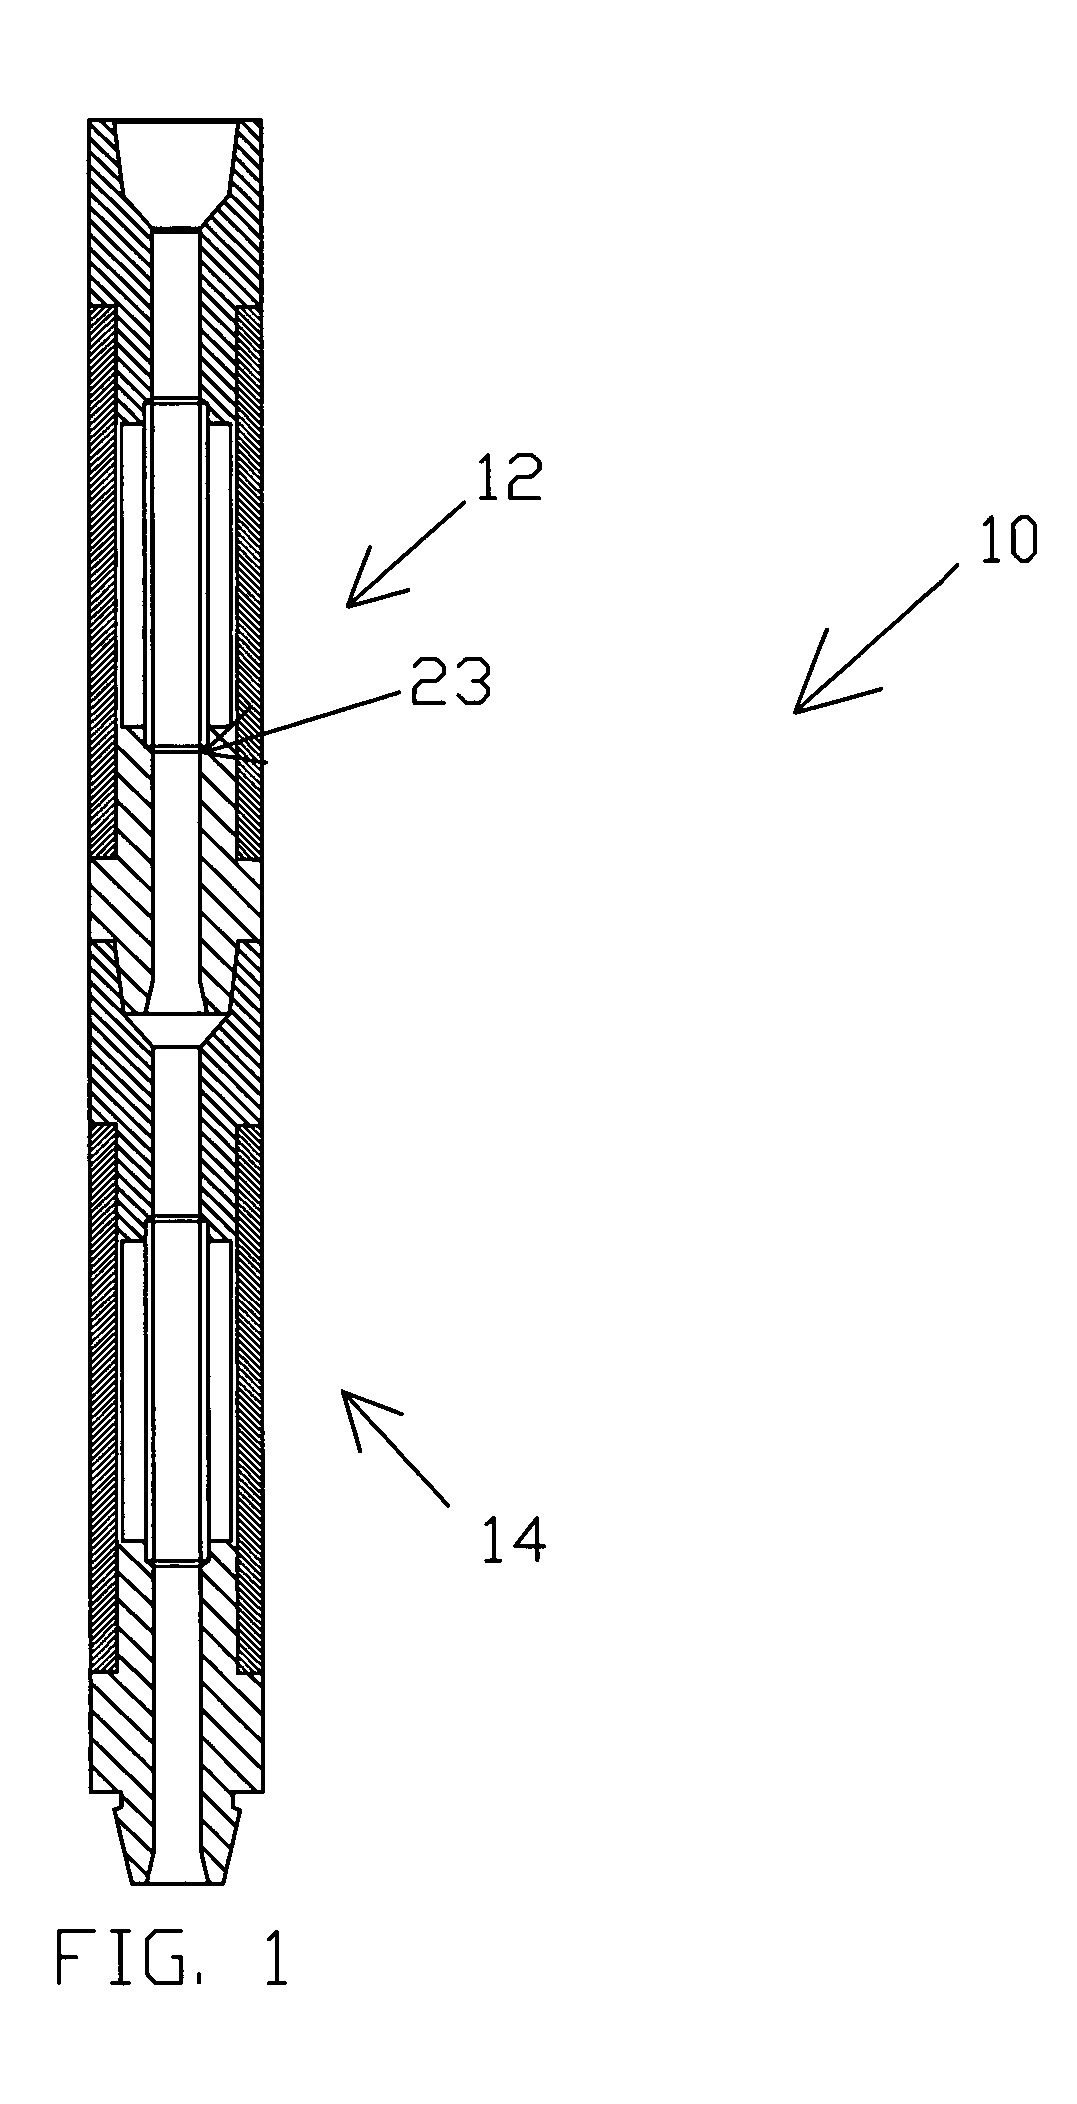 Drilling assembly and method